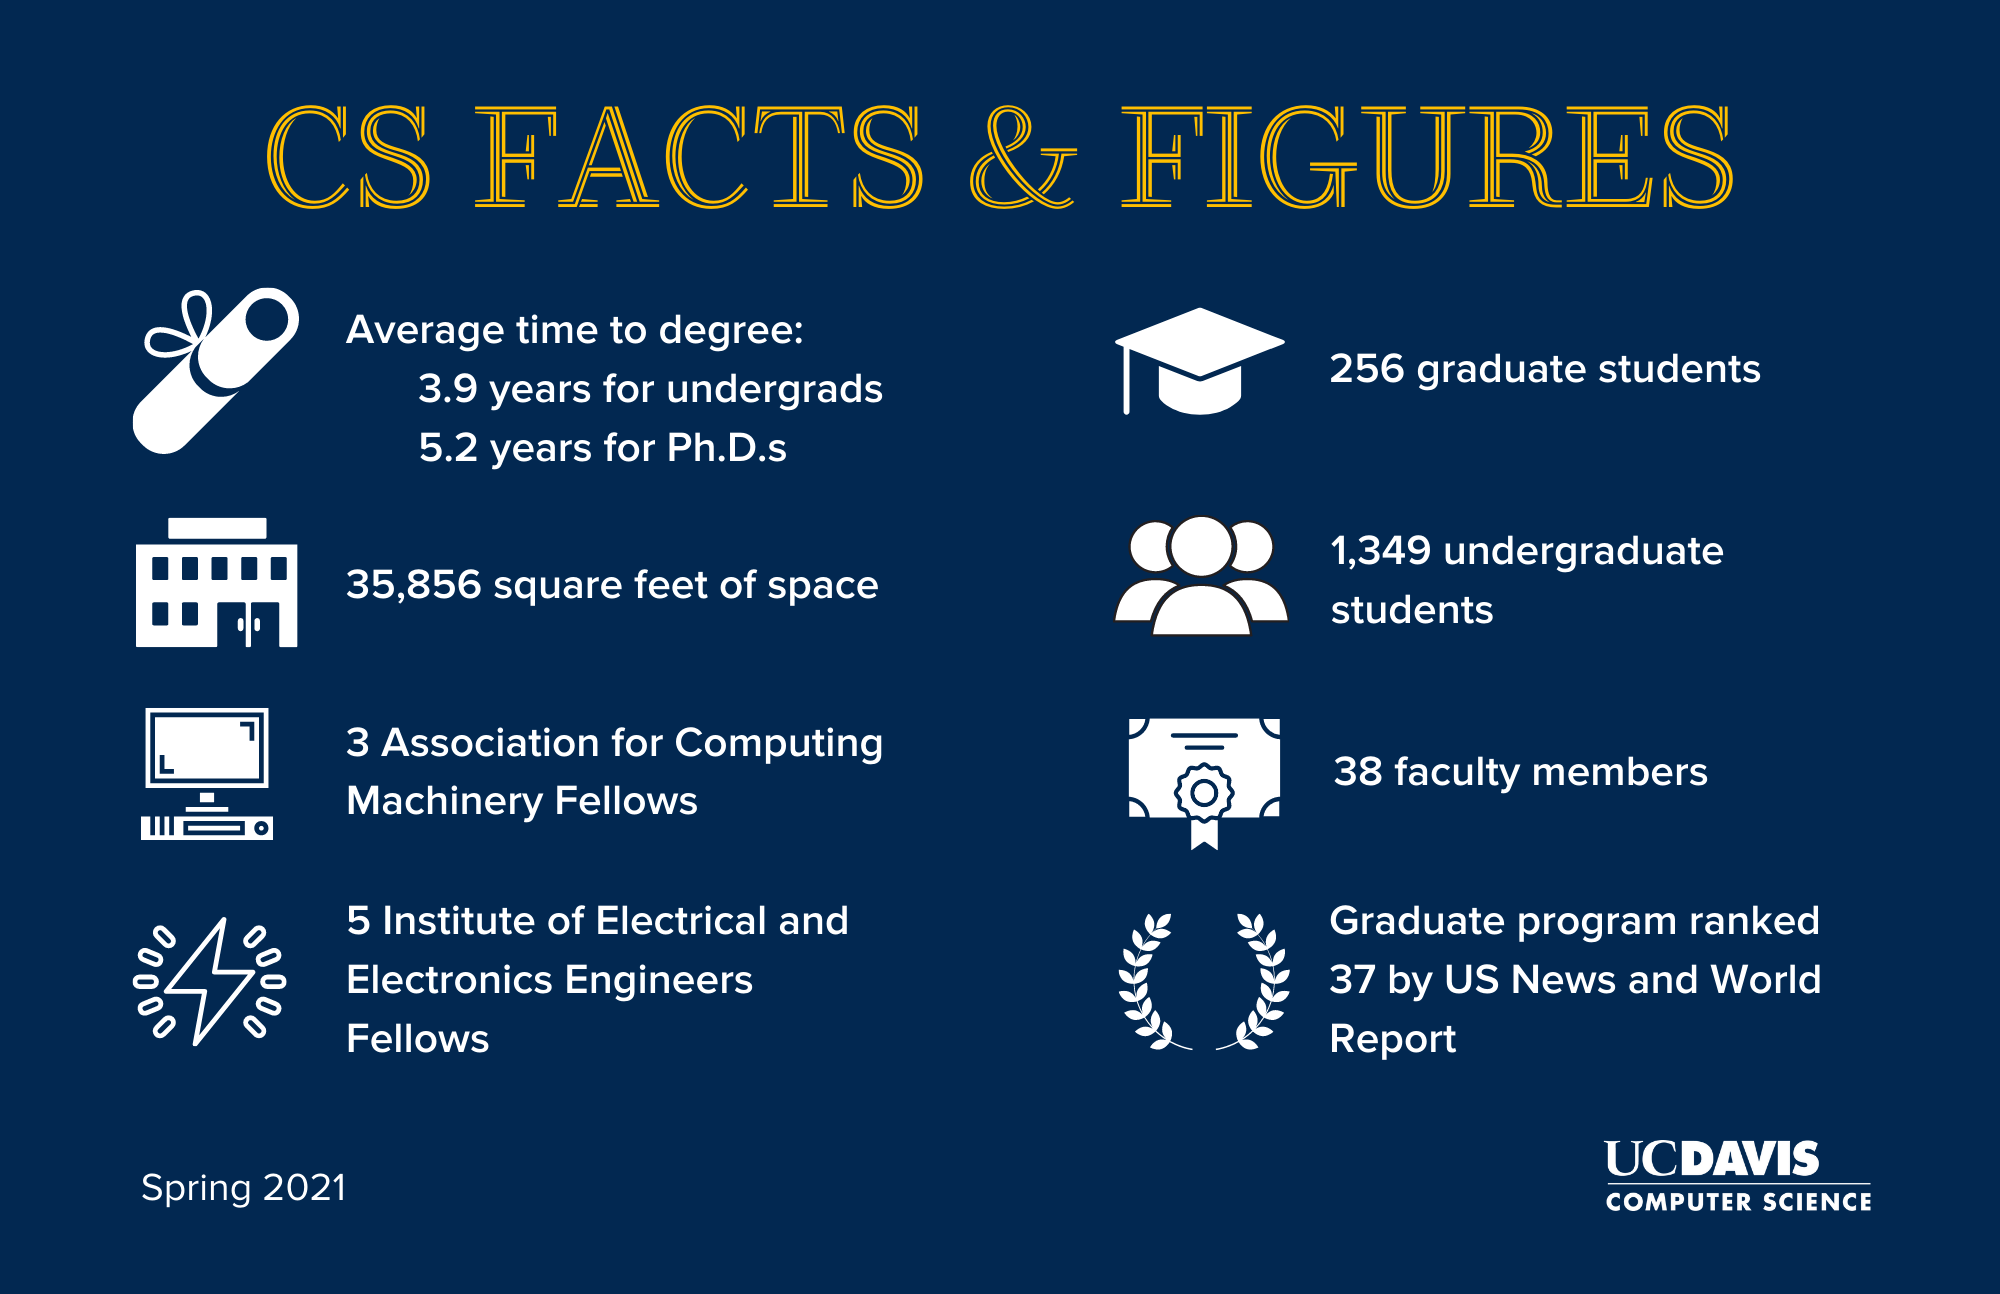 uc davis computer science fast facts 2021